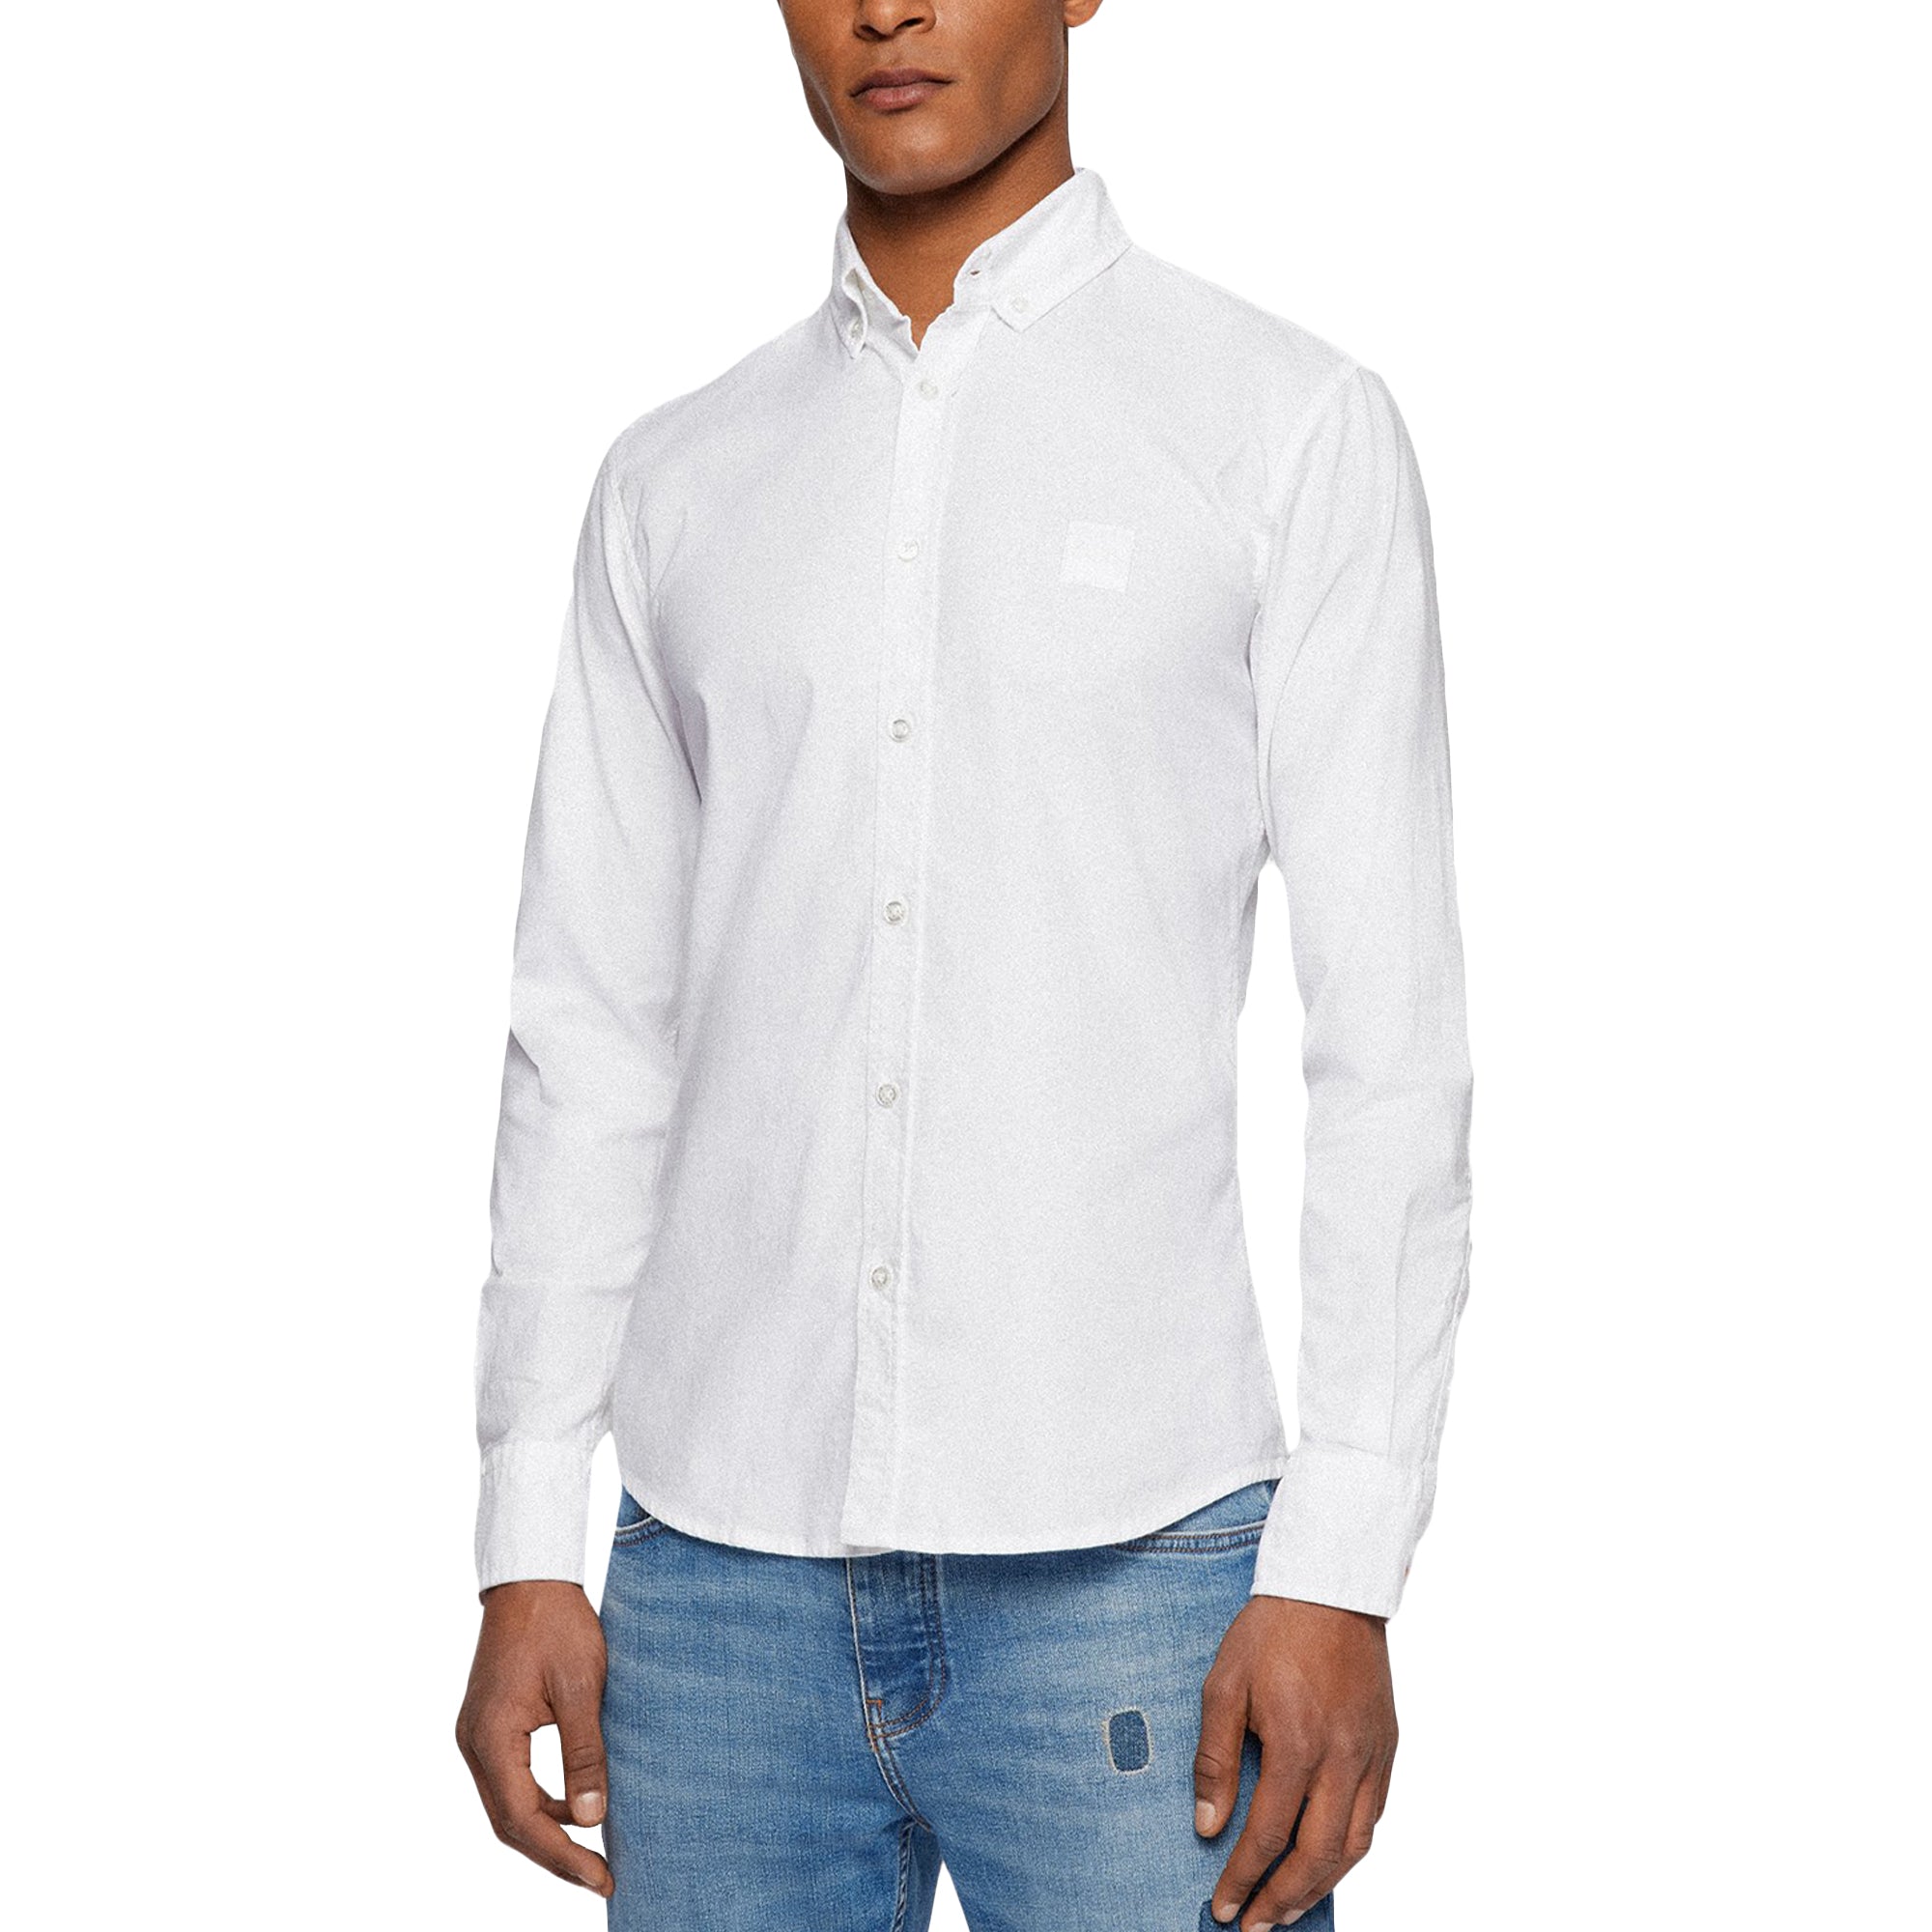 Boss Mabsoot 2 Oxford Slim Fit Shirt - White